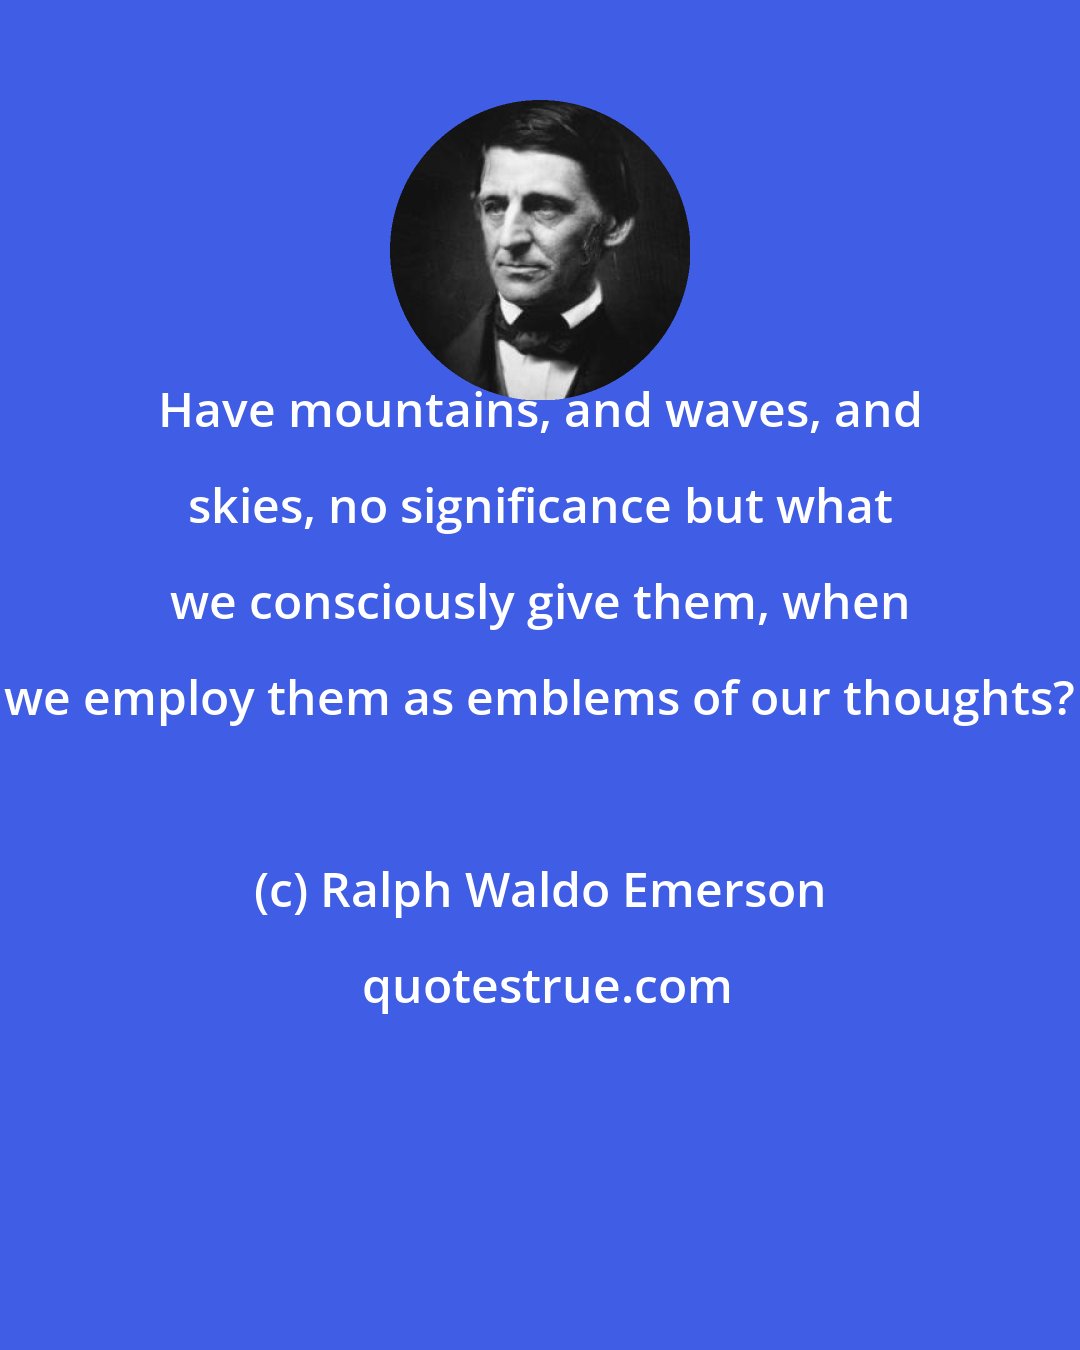 Ralph Waldo Emerson: Have mountains, and waves, and skies, no significance but what we consciously give them, when we employ them as emblems of our thoughts?